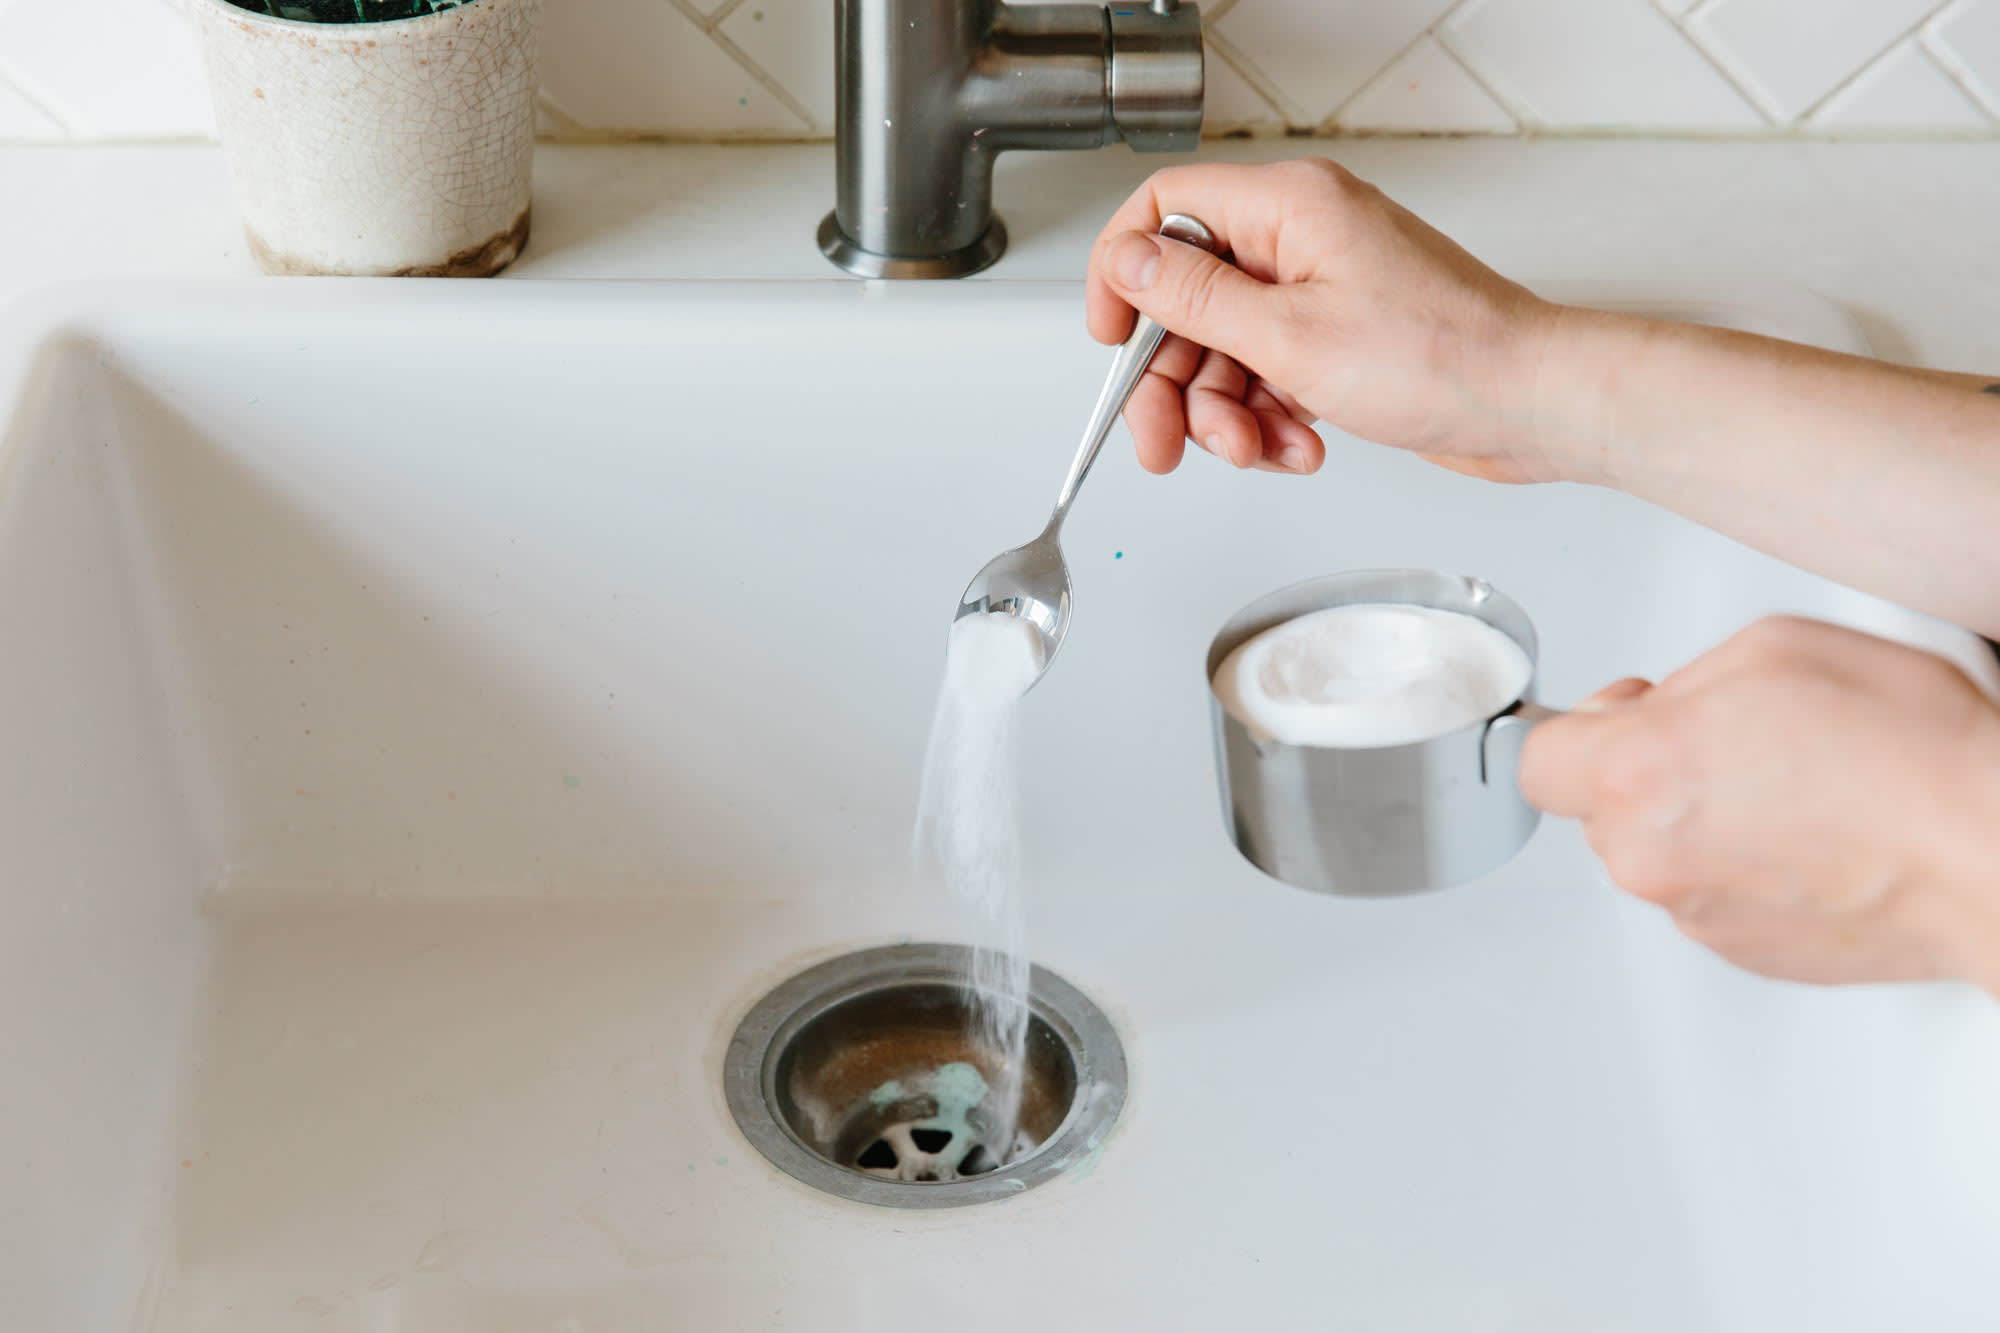 How To Make Drain Not Smell Get Rid of Stinky Kitchen Sink Smells | Kitchn